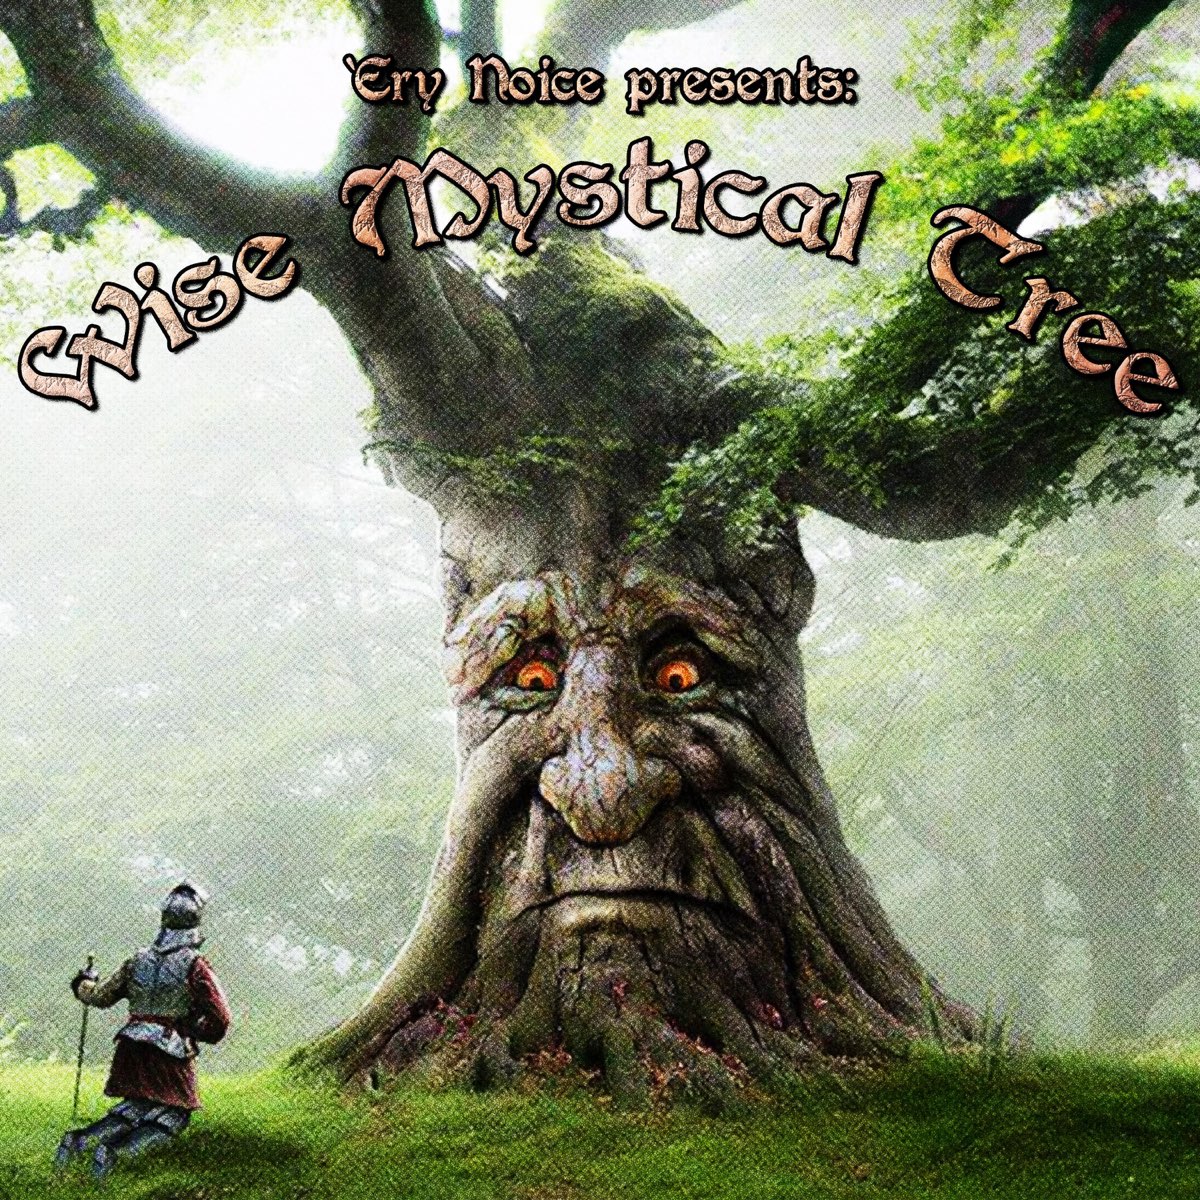 Wise Mystical Tree laughs and sticks tongue out with dubstep music #му, Wise  Mystical Tree